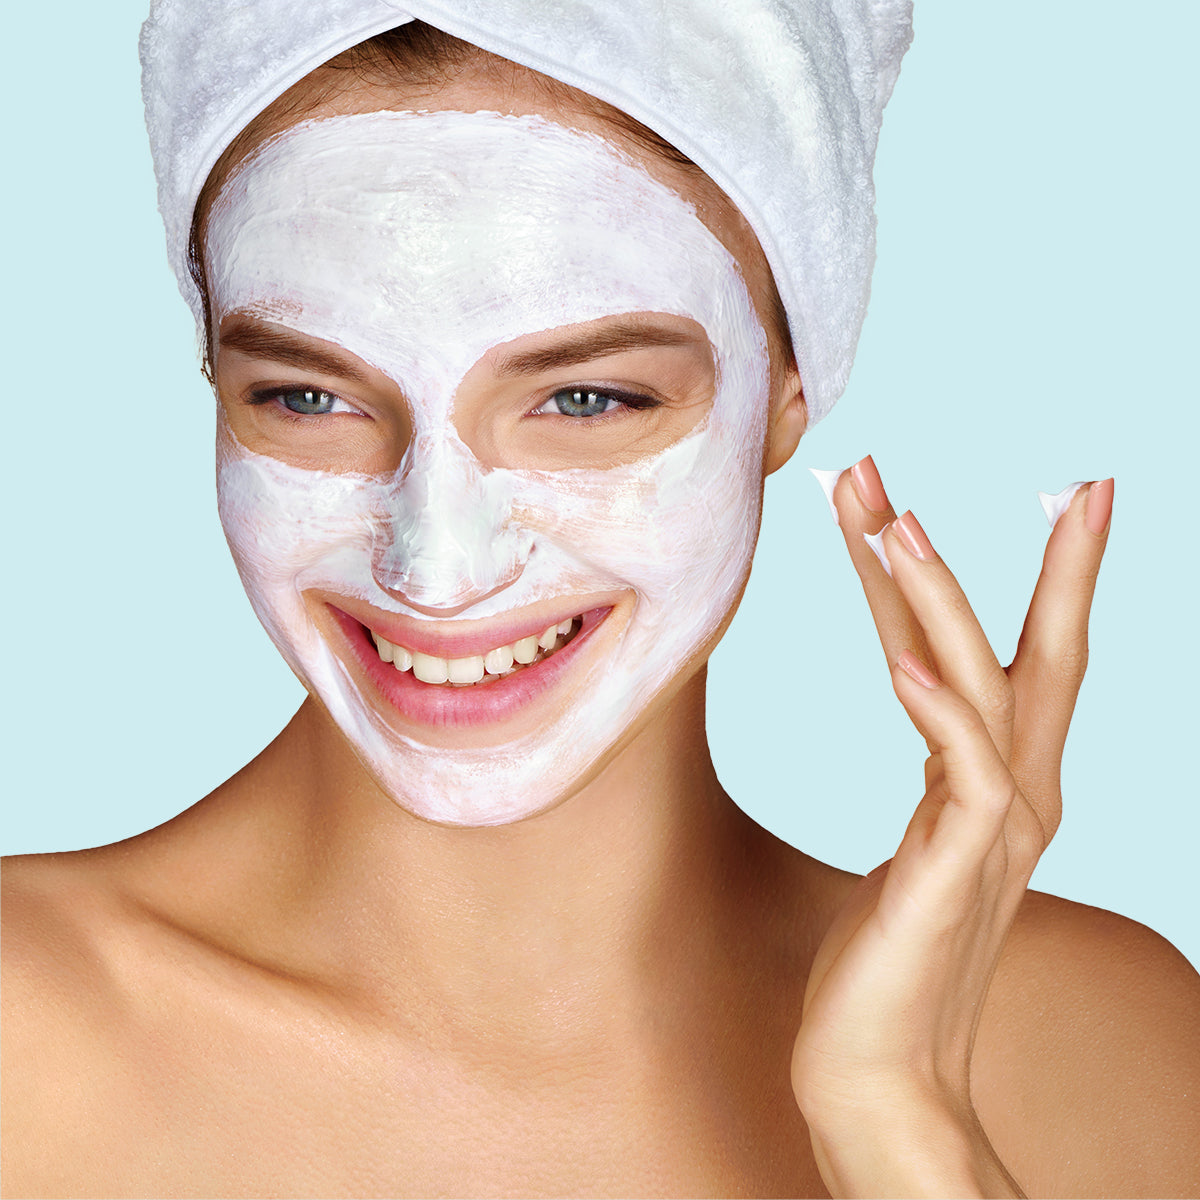 The Importance of Skin Care & Benefits of Plant Based Products